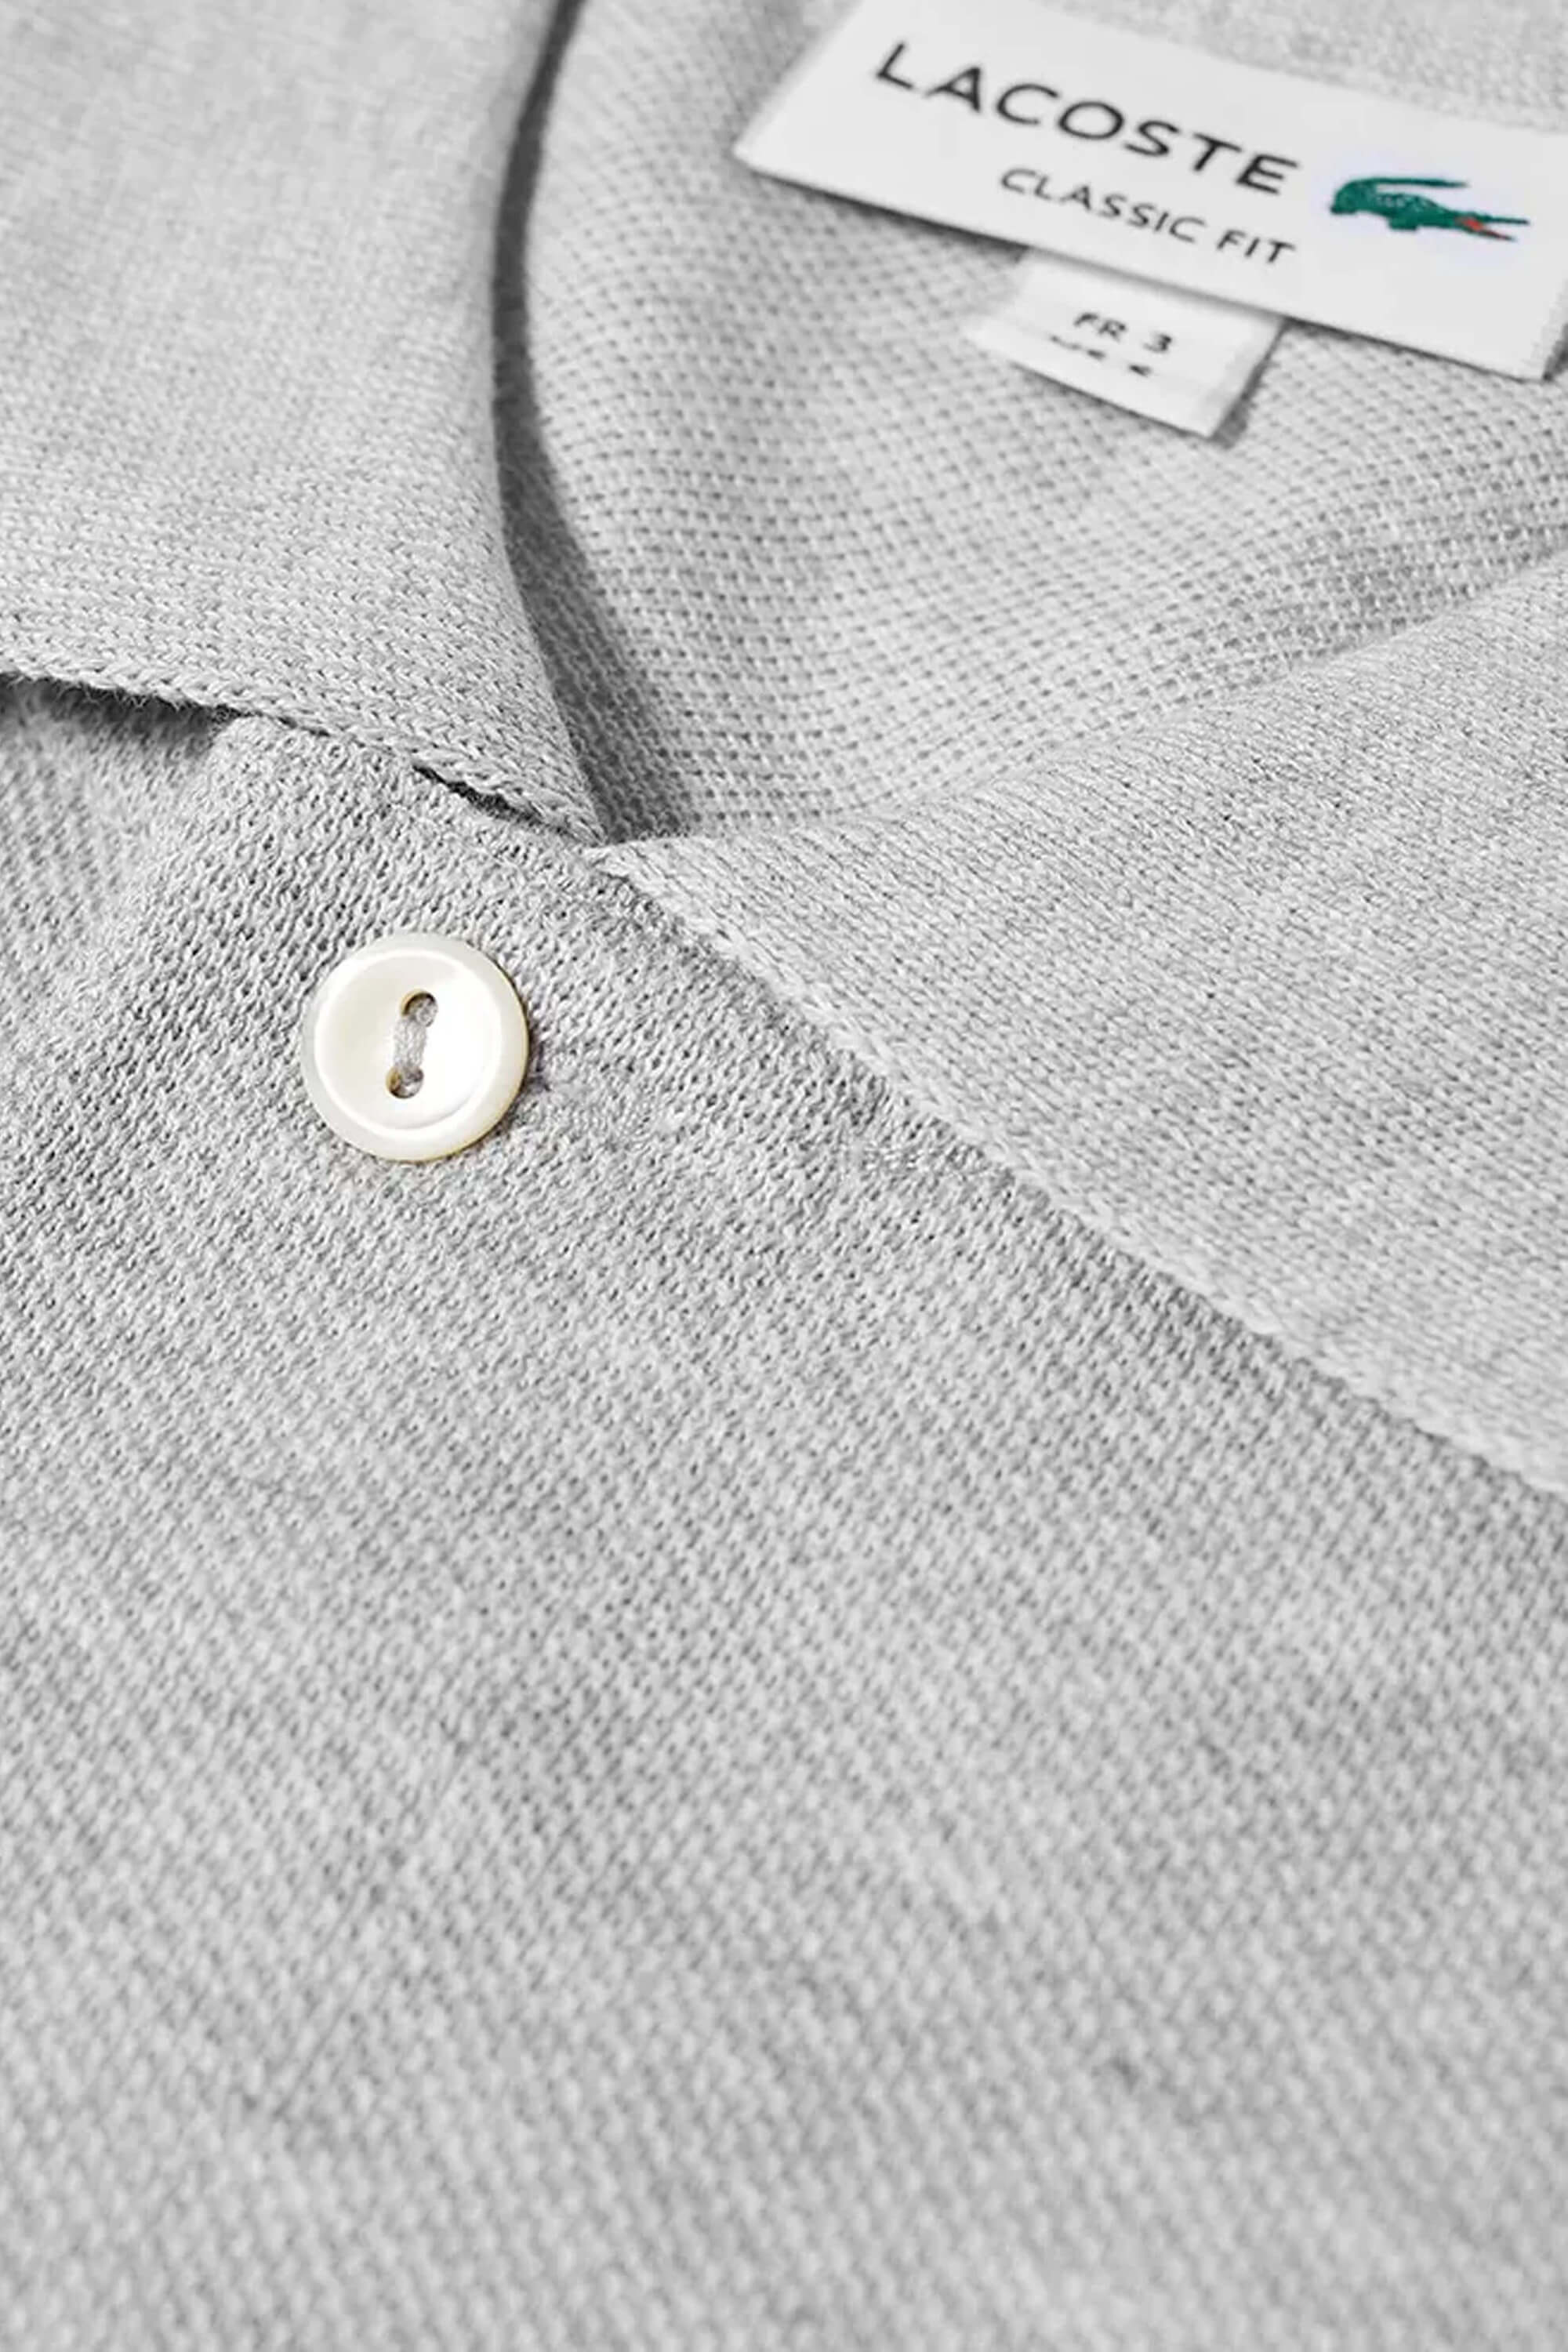 Lacoste Classic Fit Light Grey Polo